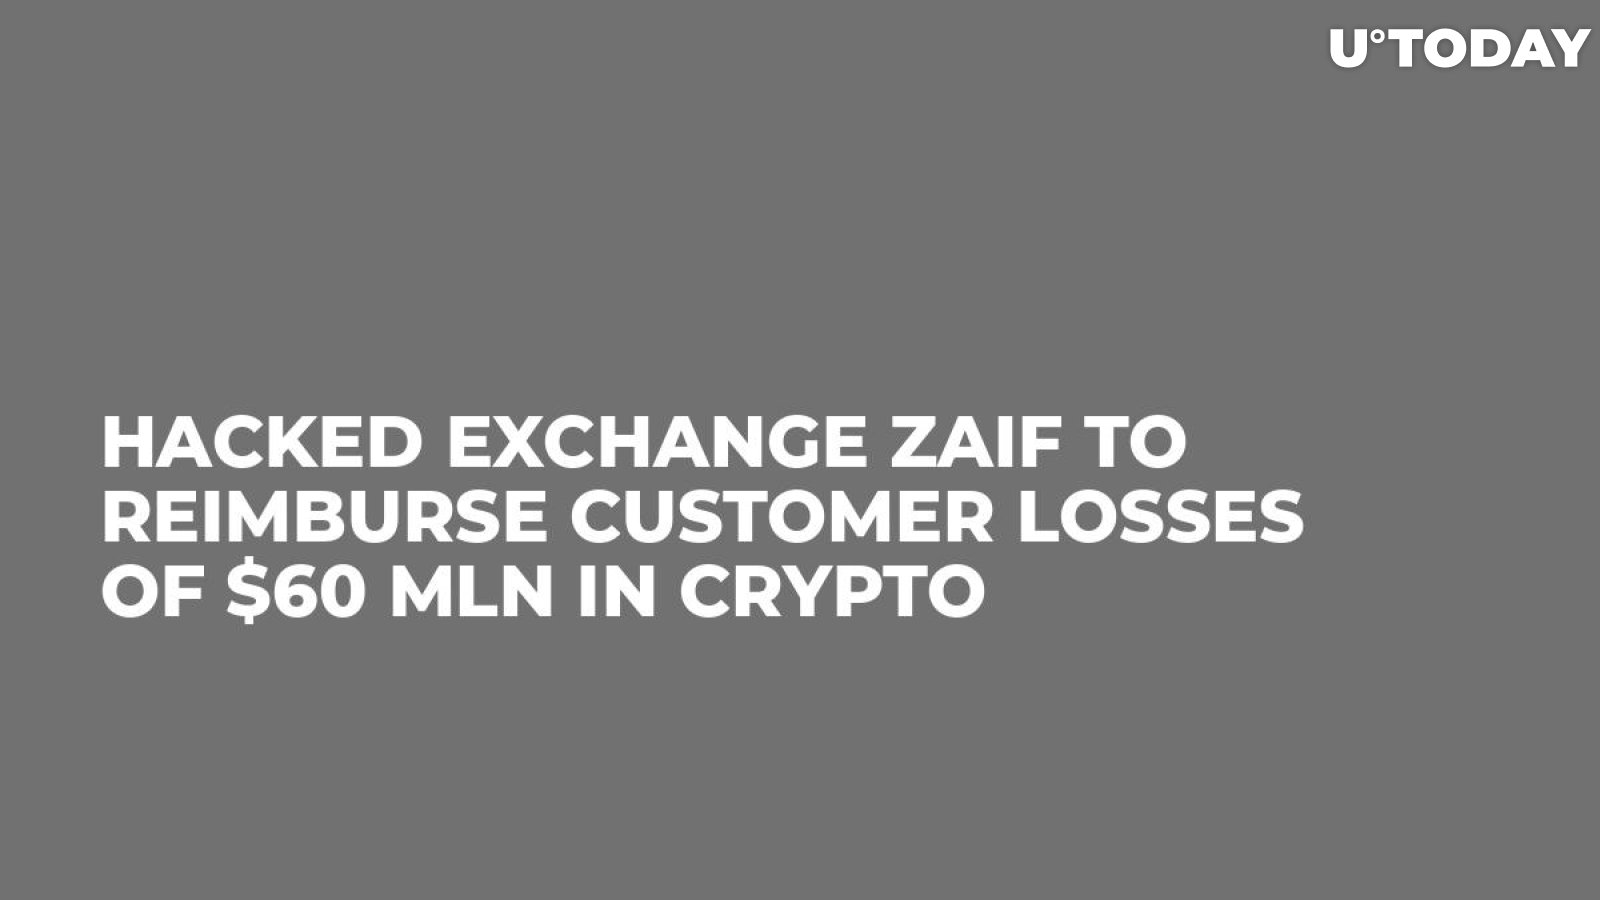 Hacked Exchange Zaif to Reimburse Customer Losses of $60 Mln in Crypto